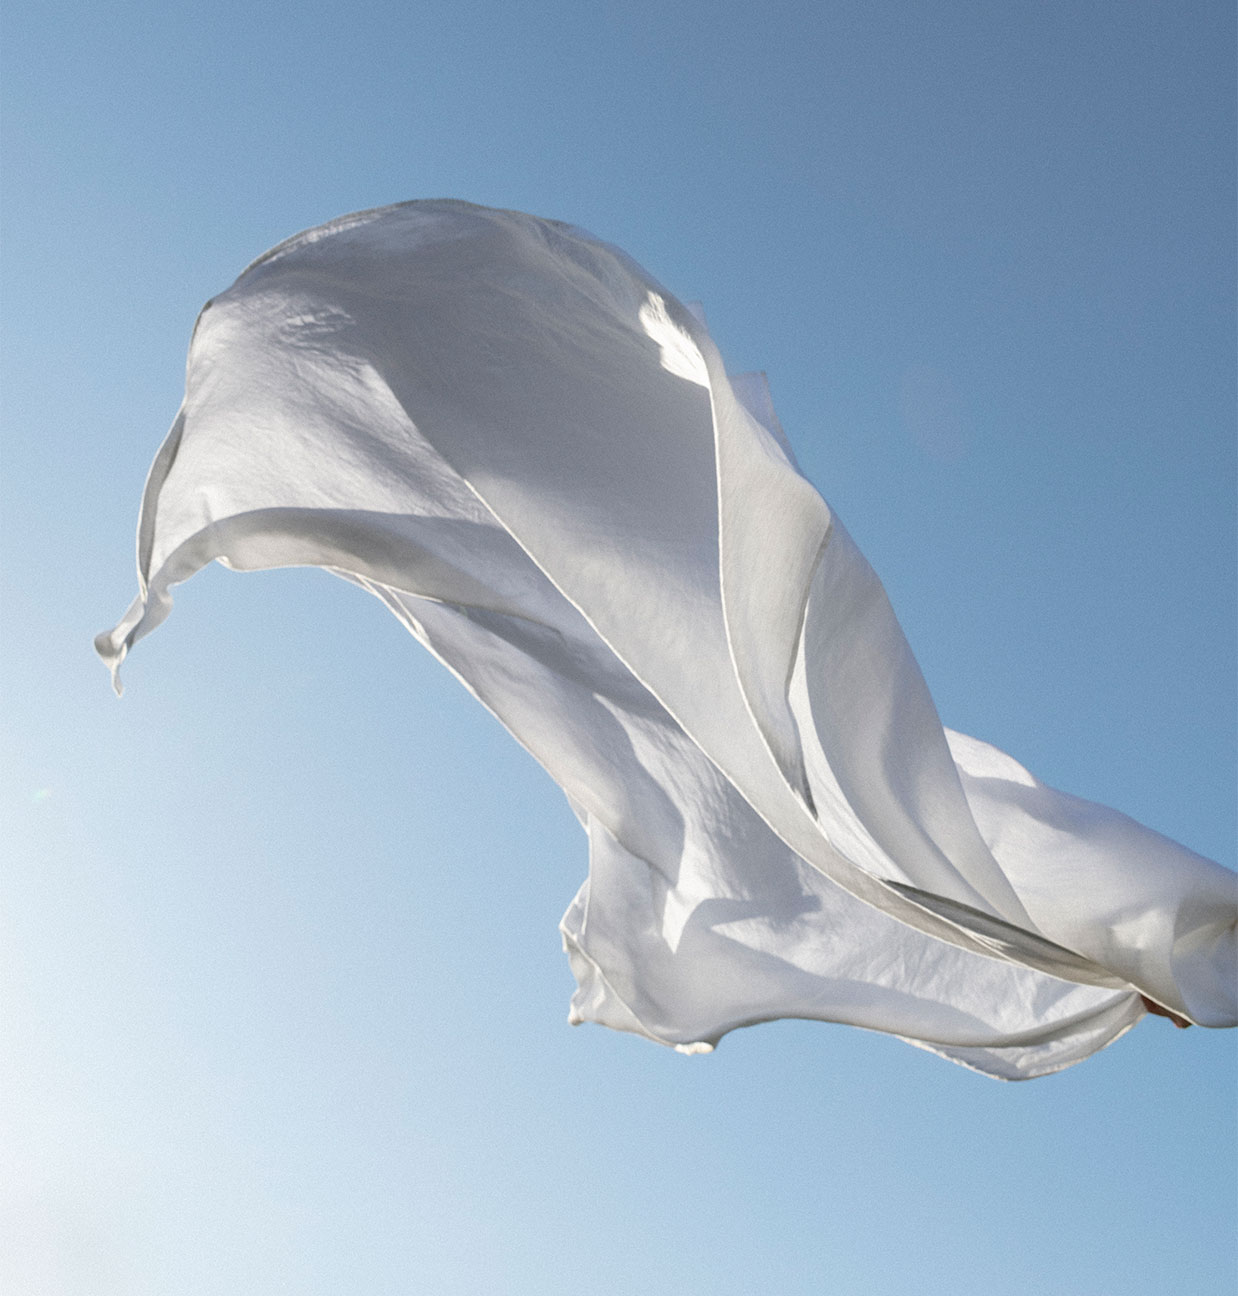 A white sheet blowing in the wind against the backdrop of a clear blue sky.